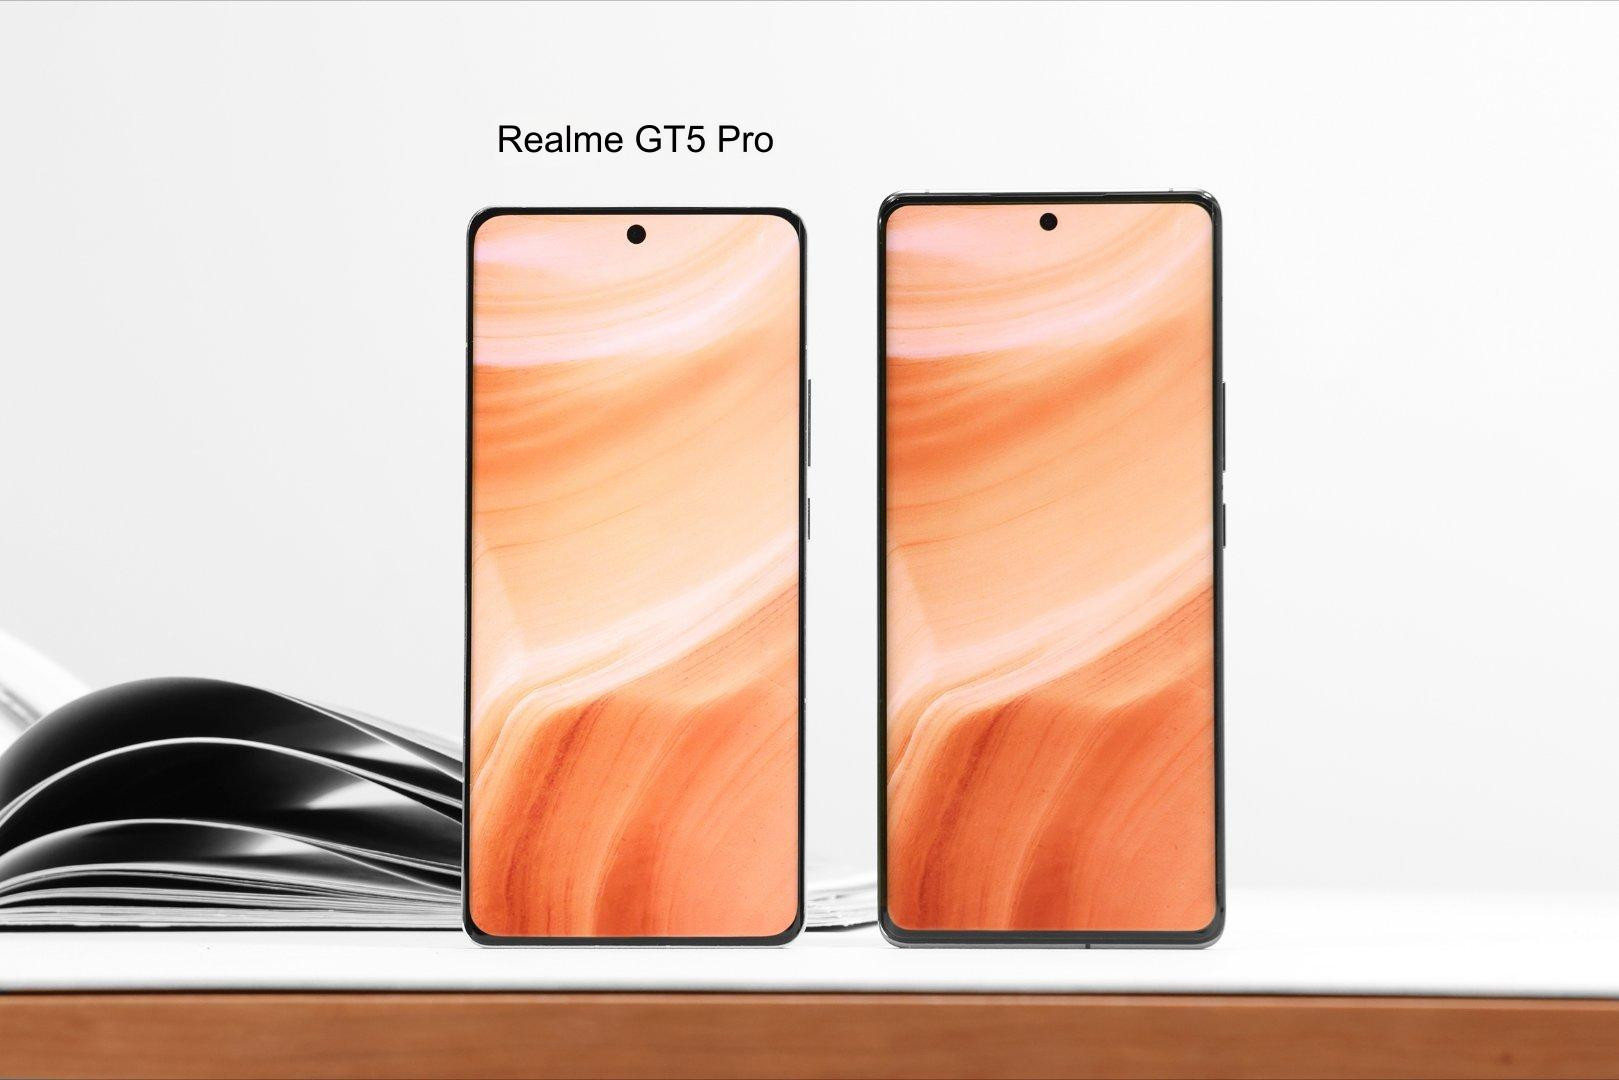 Realme GT5 Pro quick review: Looks promising and powerful - India Today